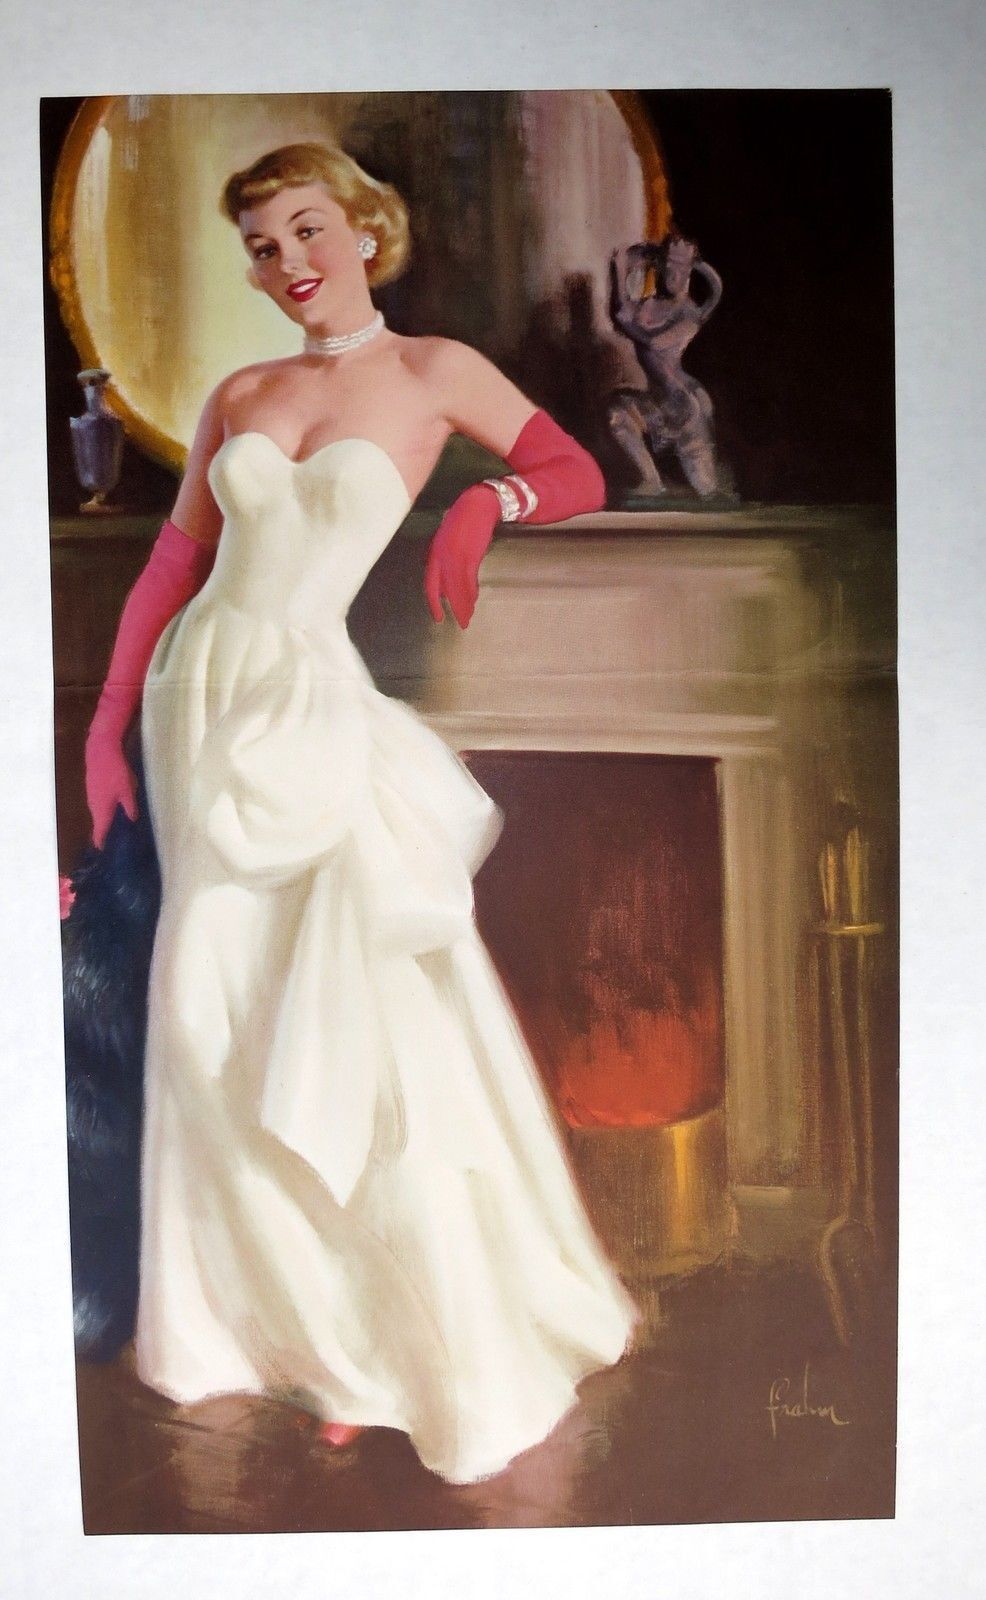 1950s Pinup Girl Picture Girl by Art Frahm Blond in White Dress Red Gloves